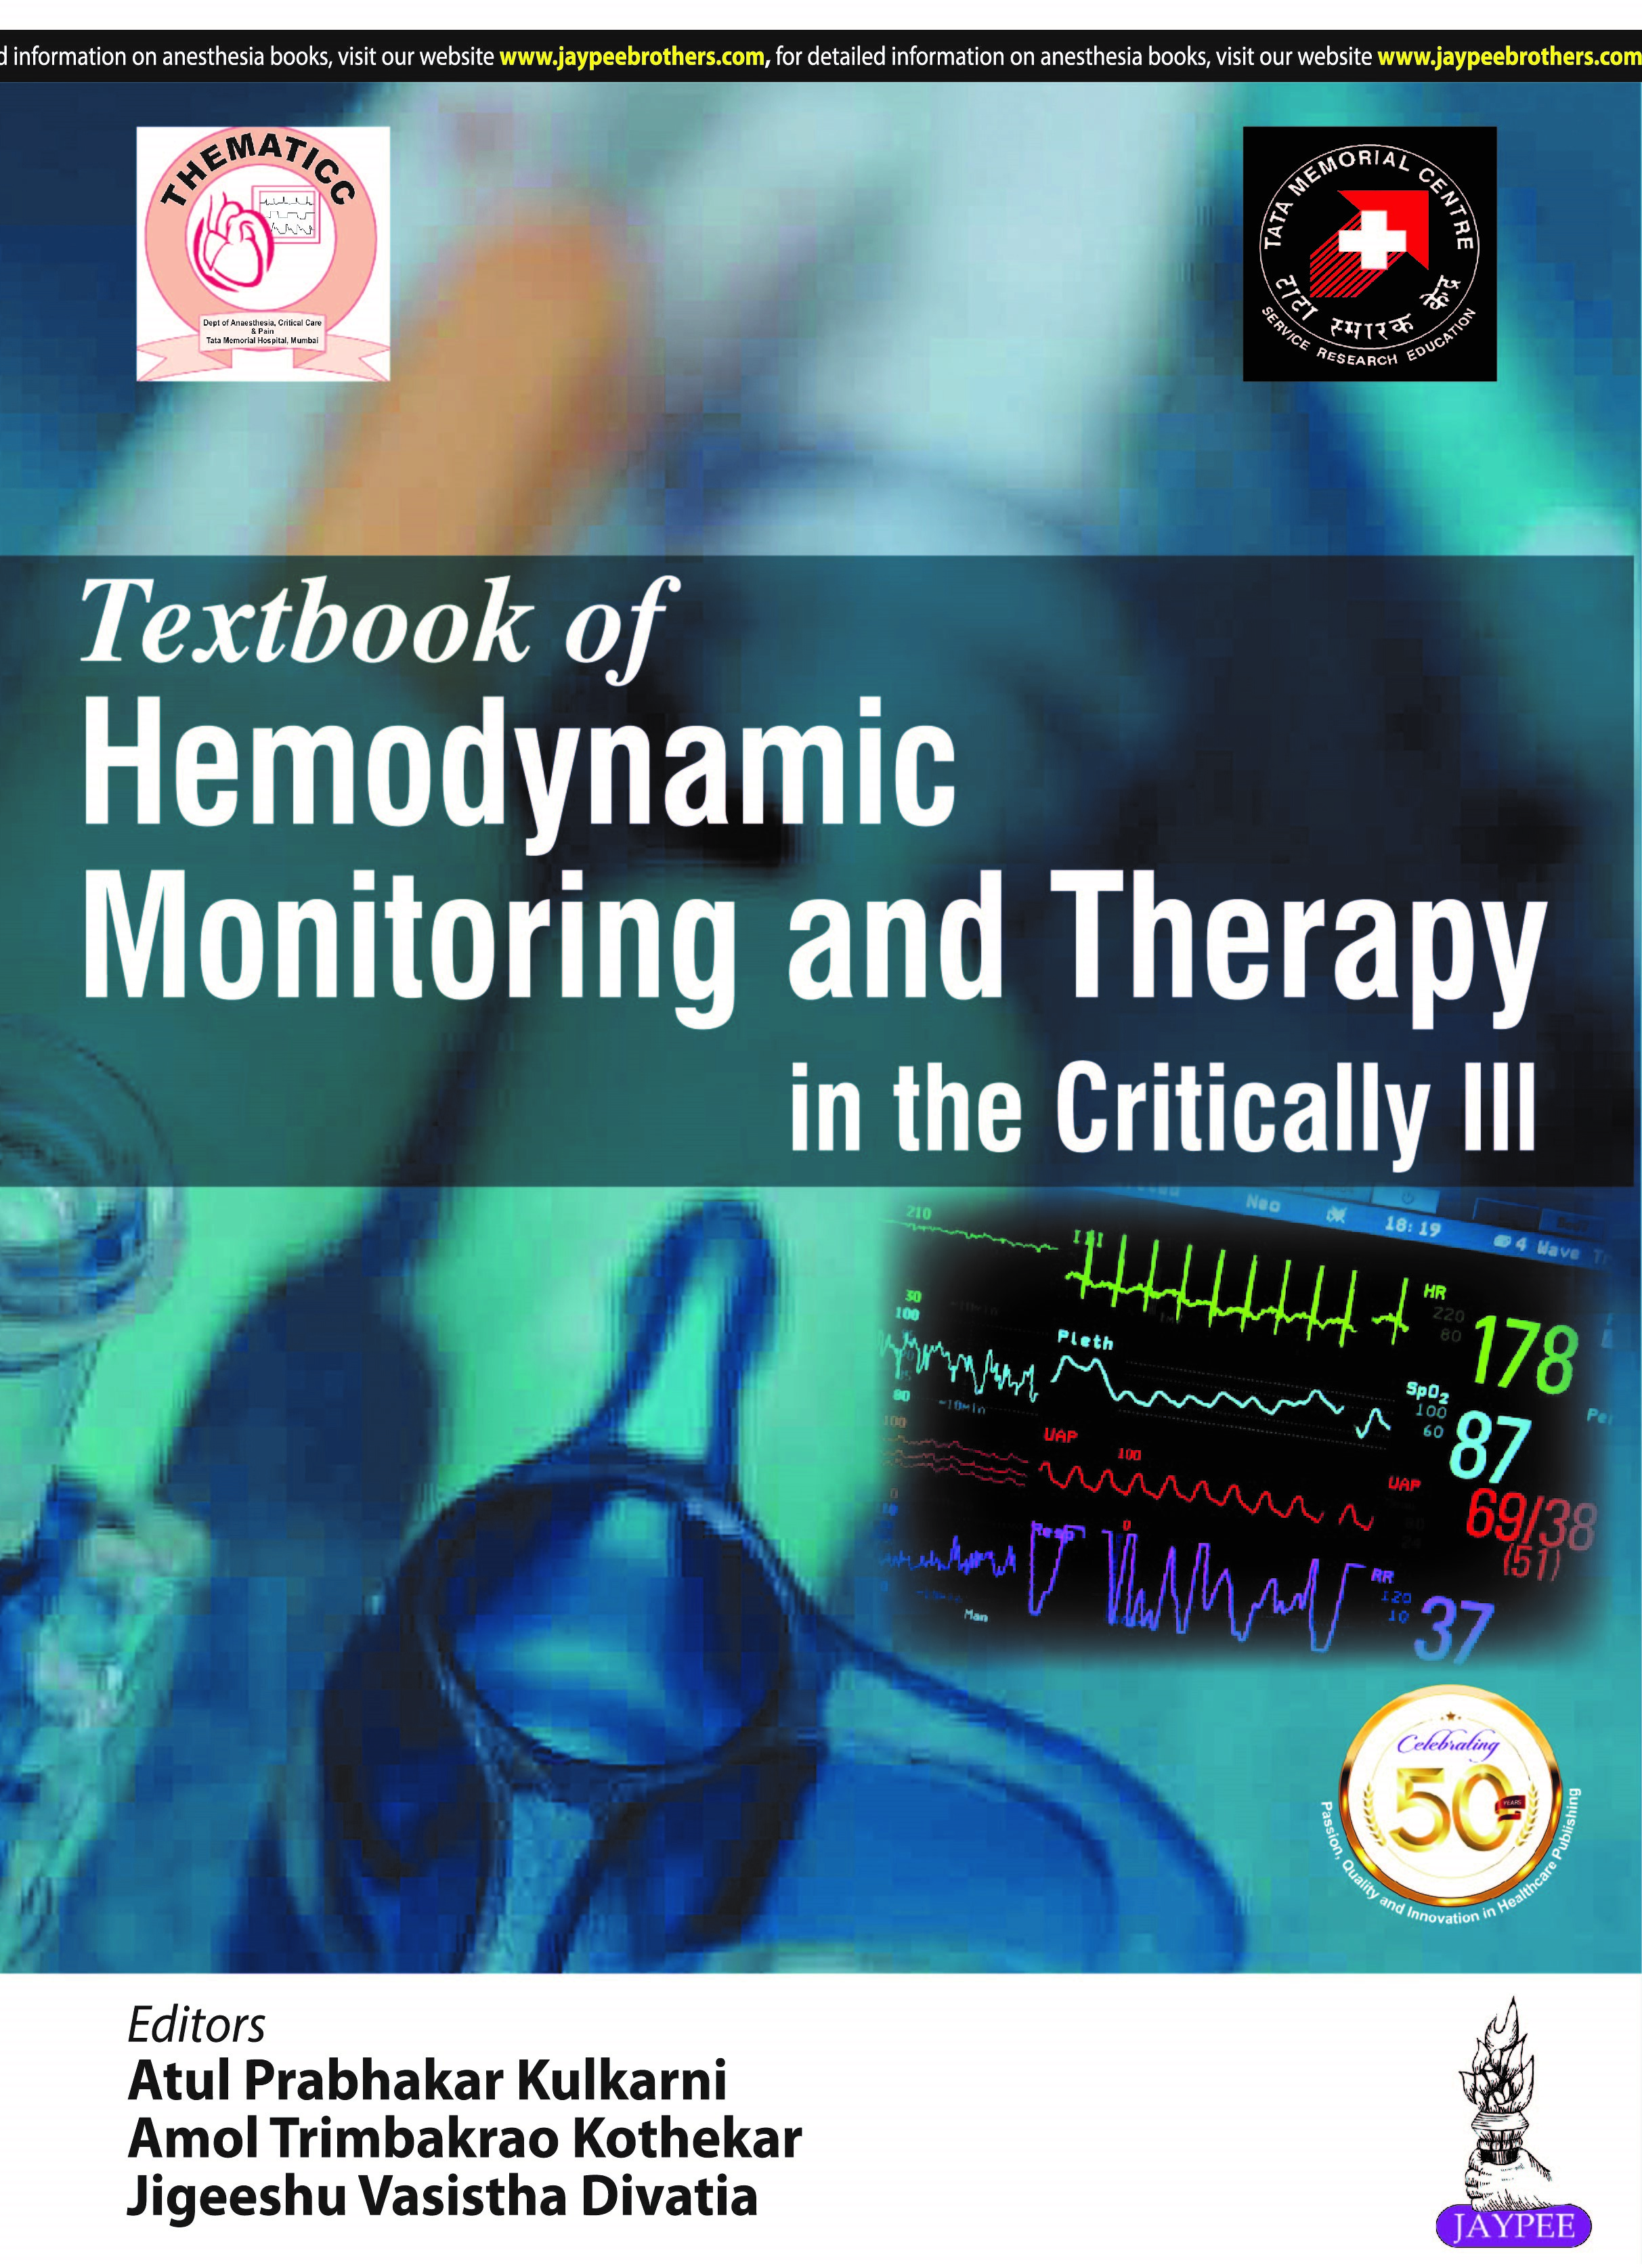 textbook-of-hemodynamic-monitoring-and-therapy-in-the-critically-ill